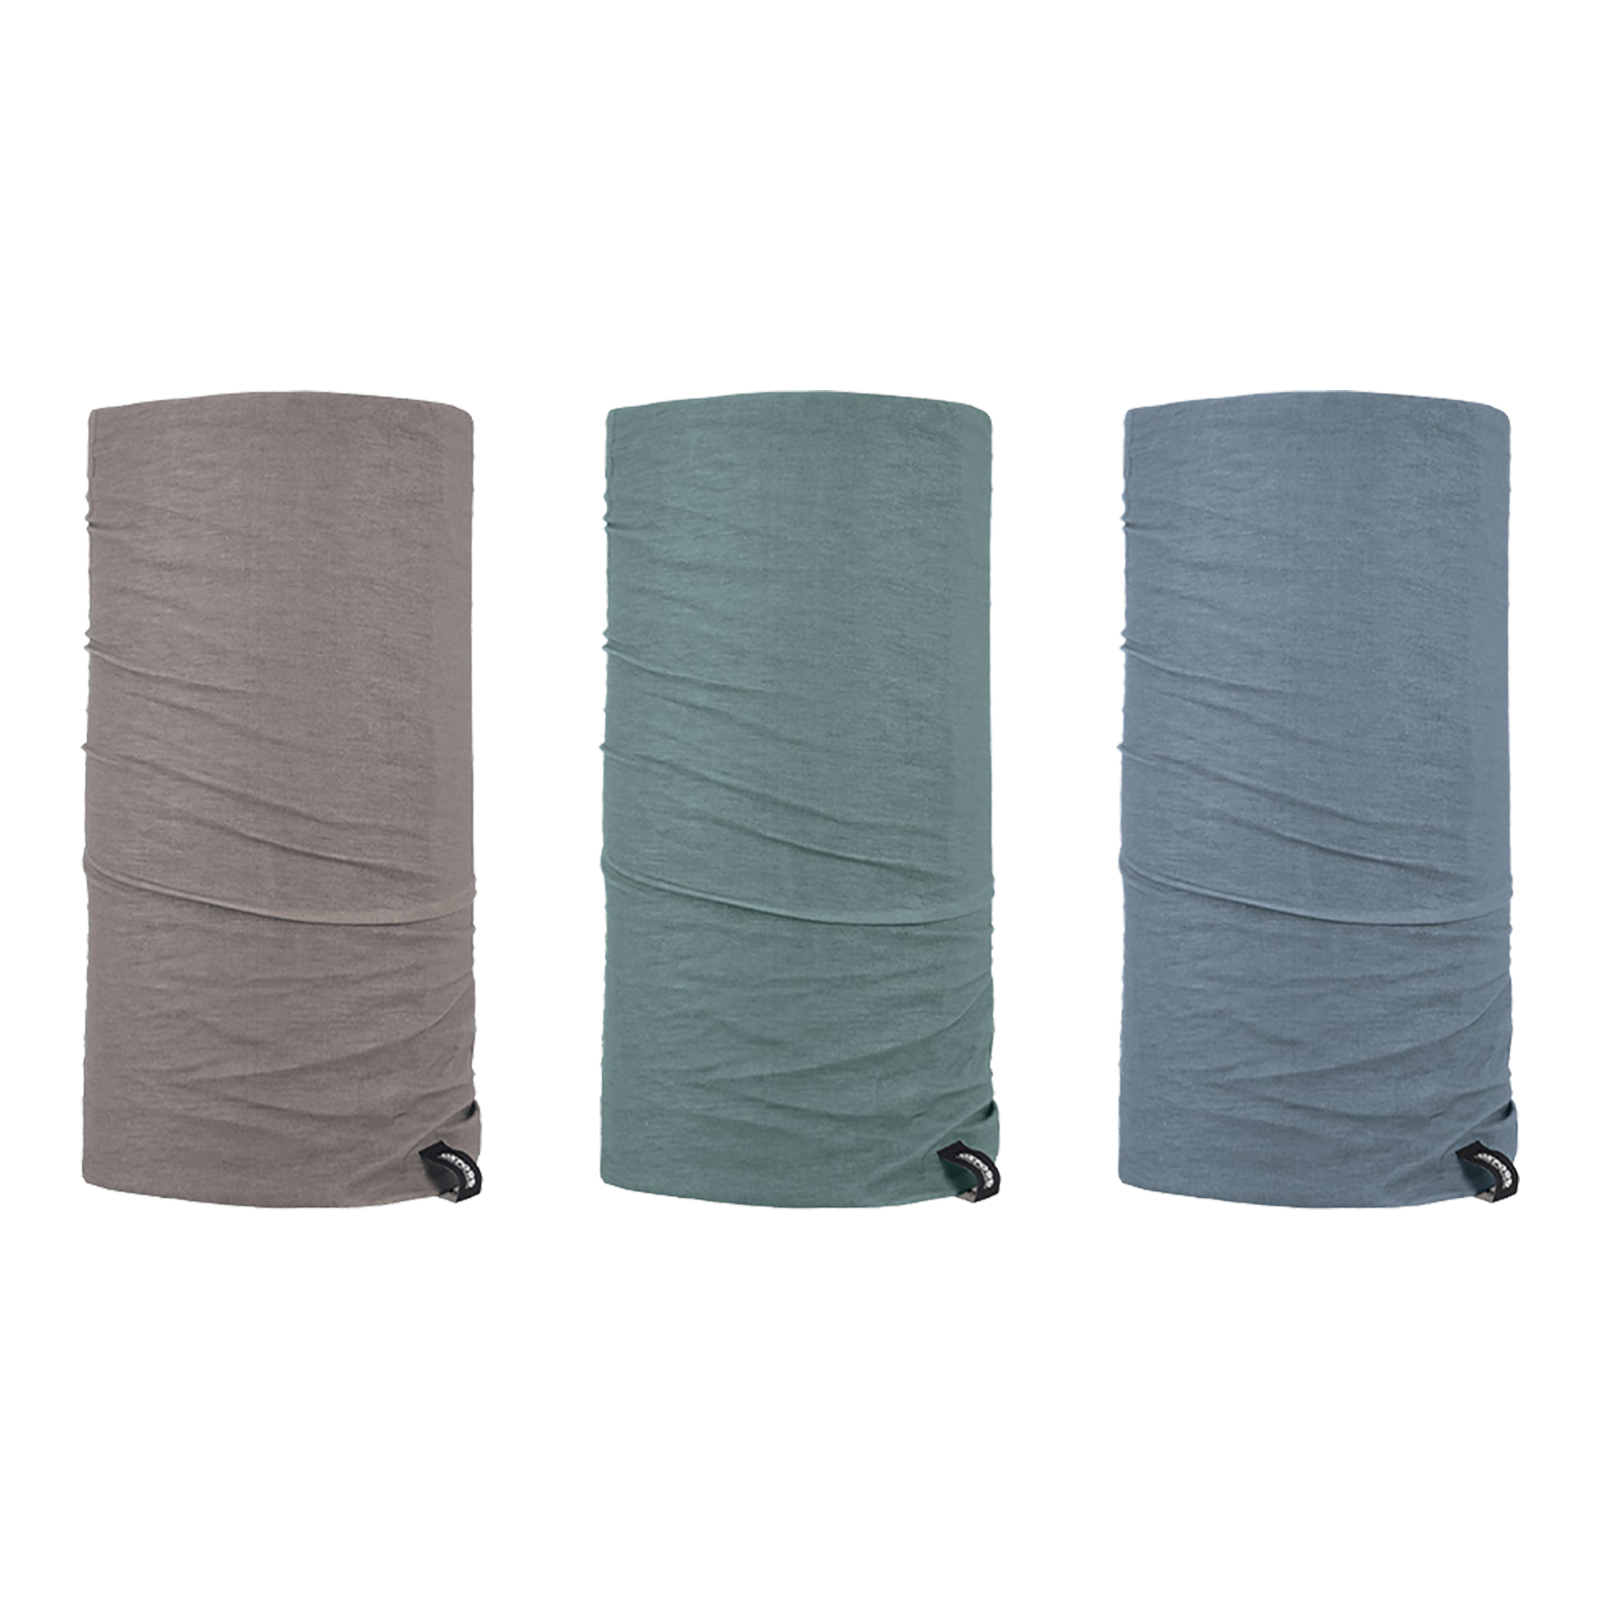 Oxford Comfy - Grey  Taupe & Khaki (3 Pack)